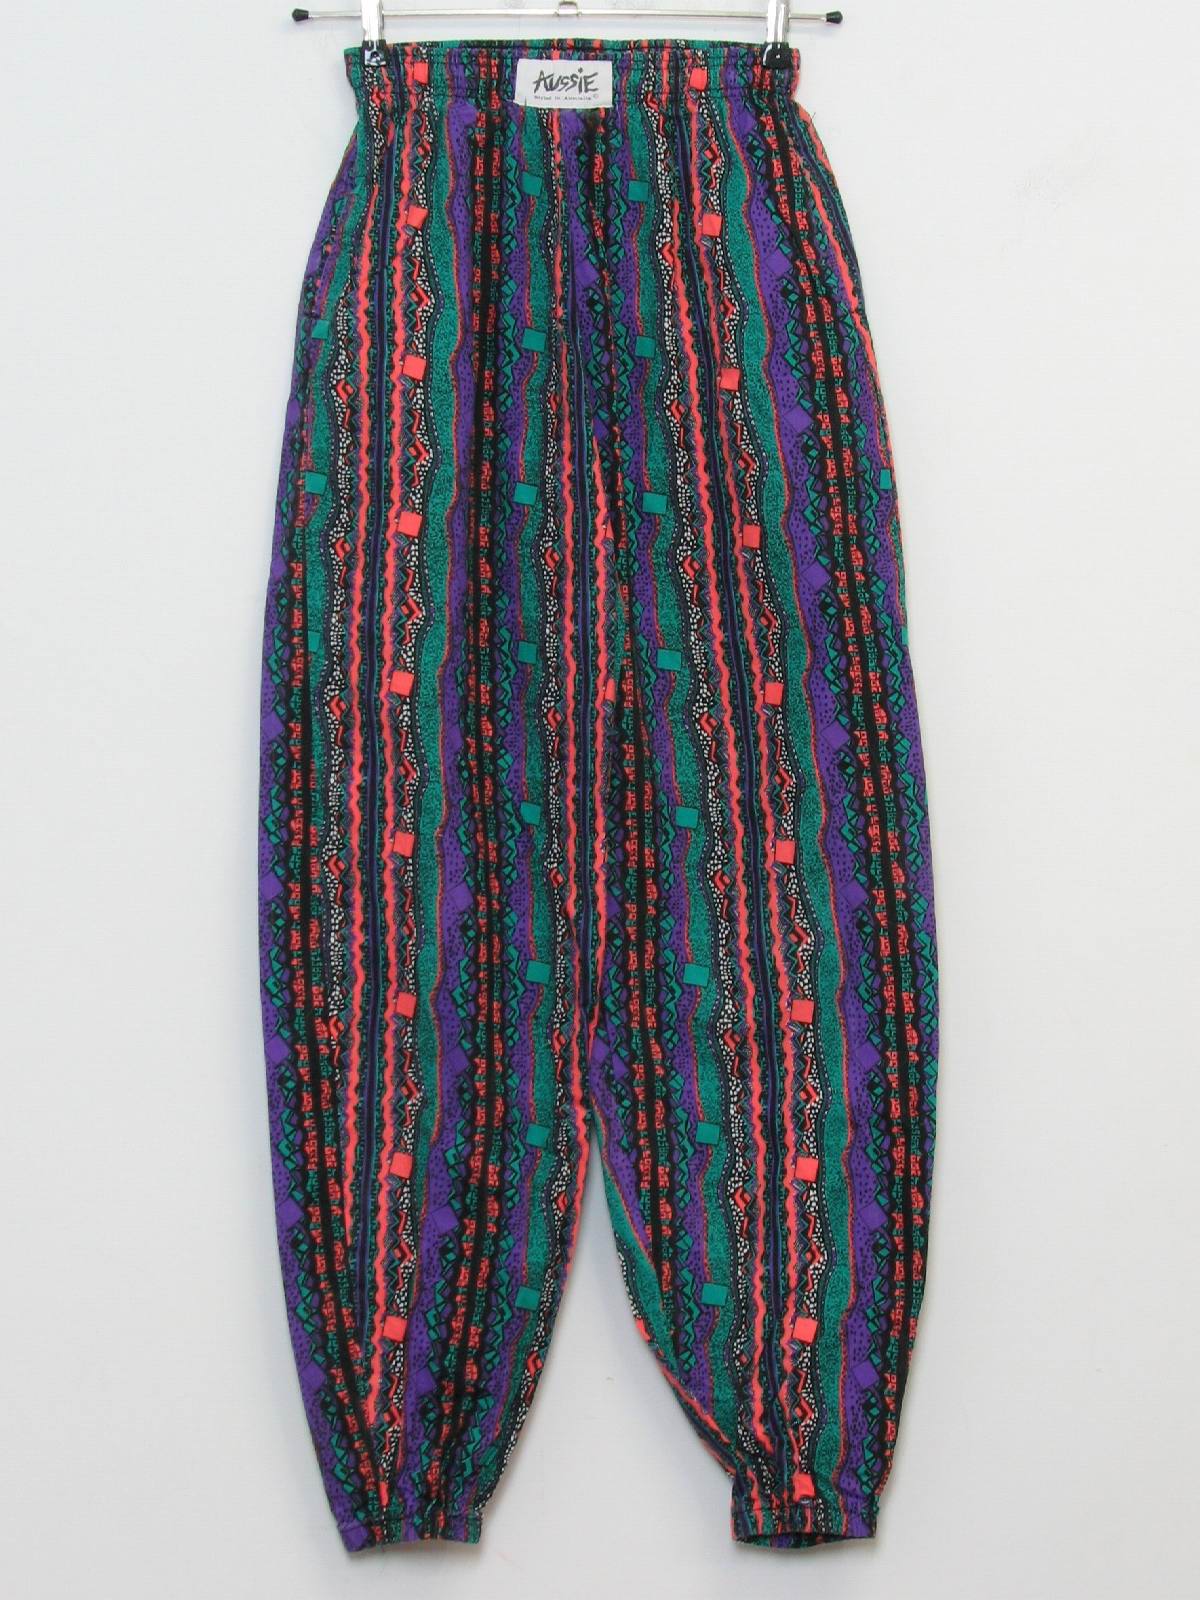 80's Aussie Pants: 80s -Aussie- Mens teal green, black, white, purple and  orange vertical banded geometric print cotton totally 80s baggy pants with  elastic waistline, two inset hip pockets and wide taper